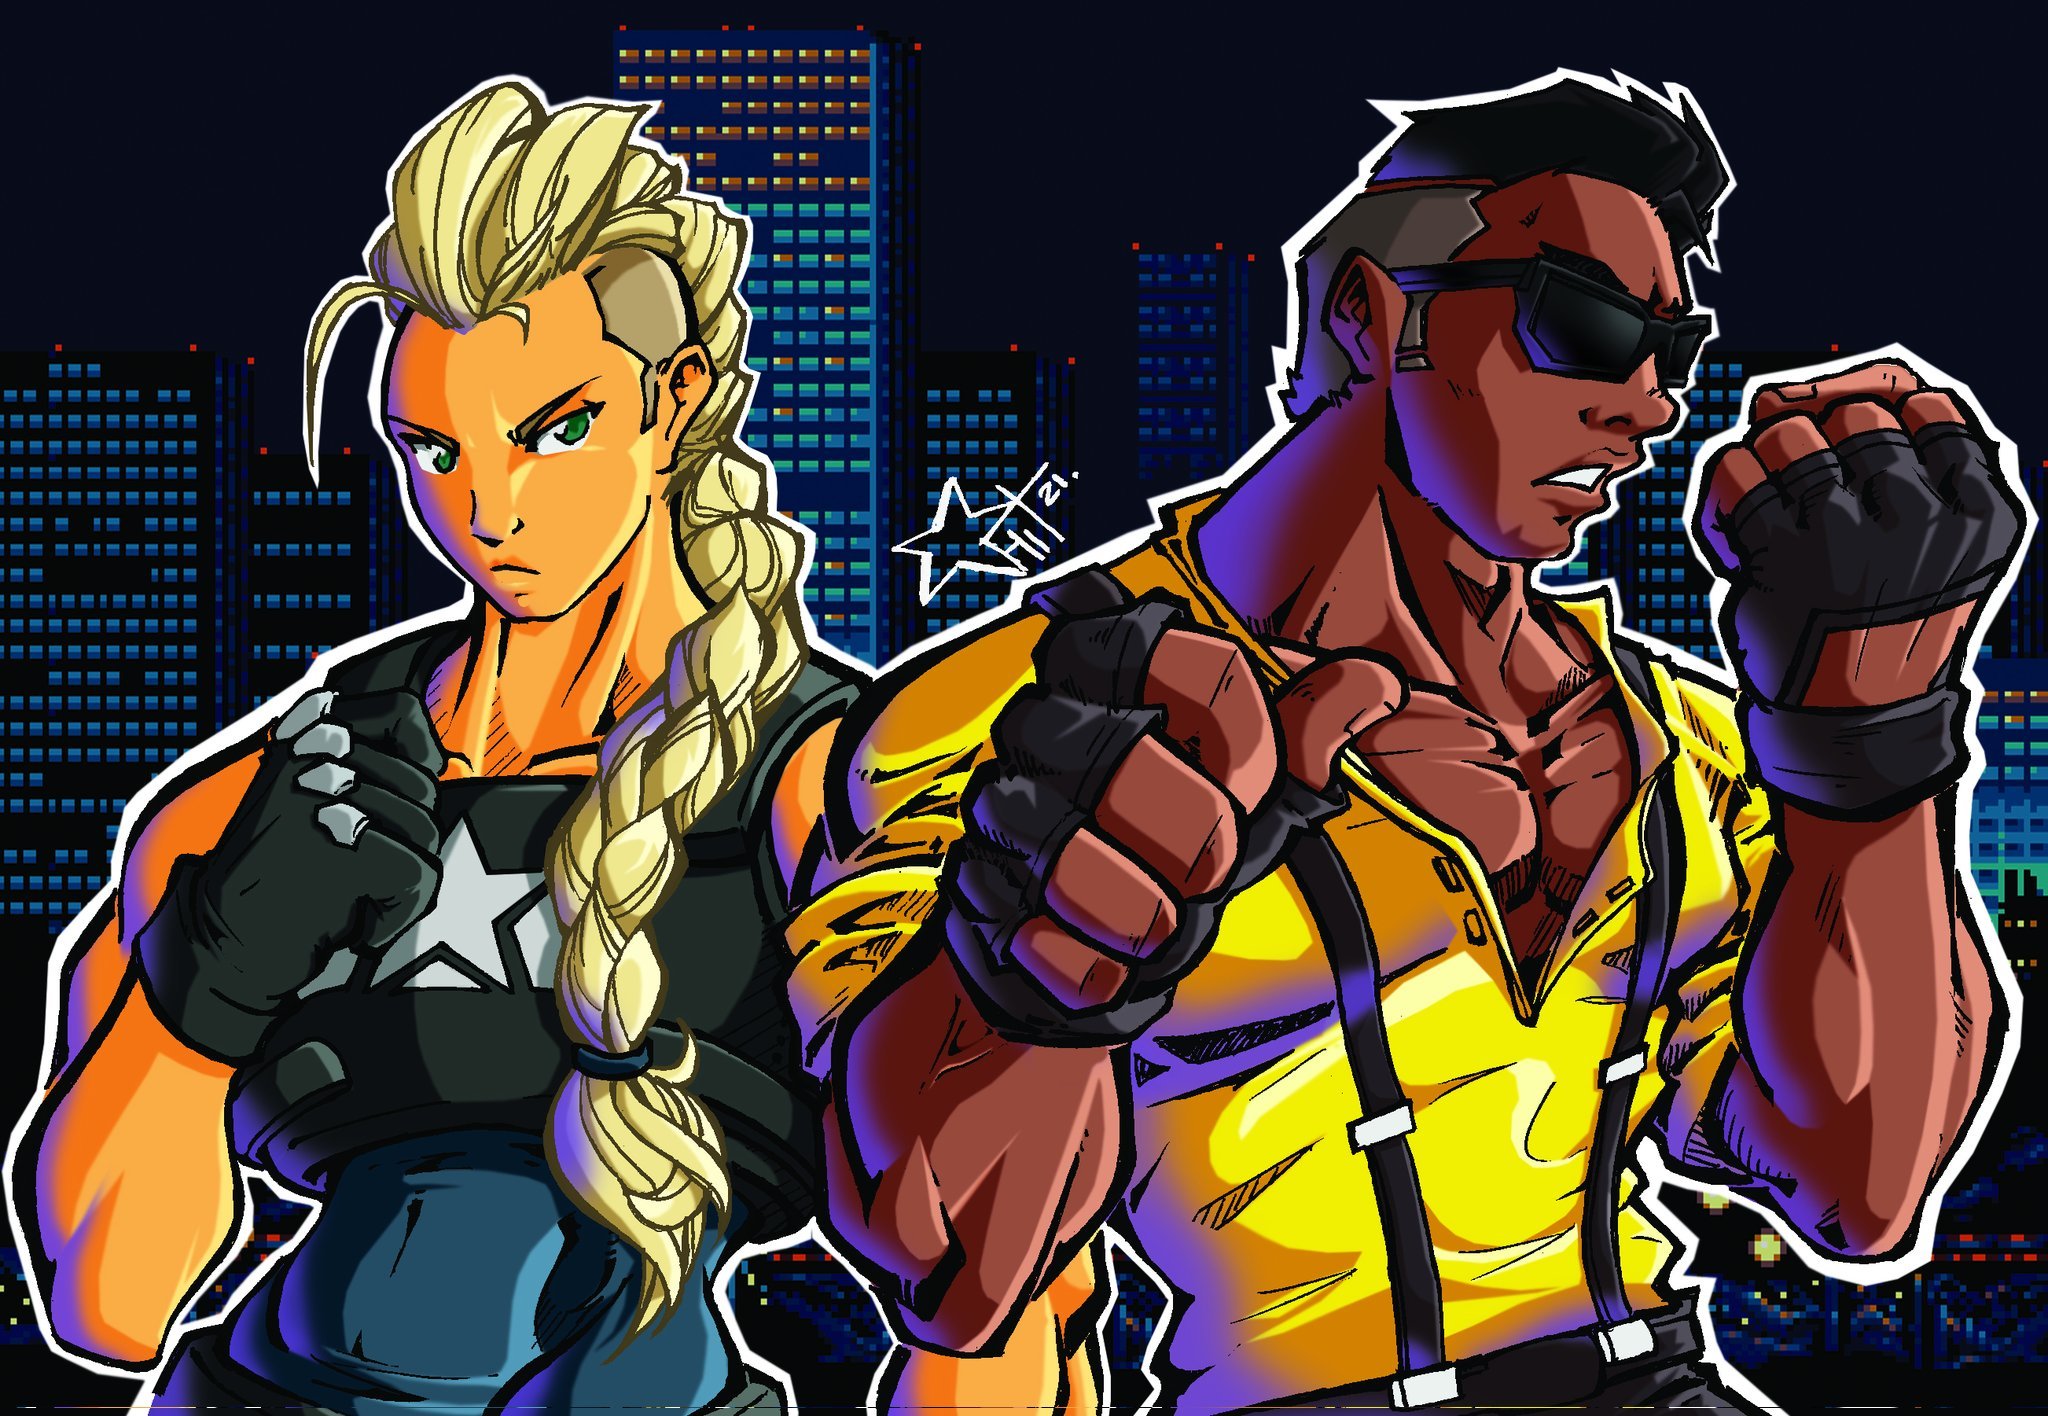 Streets of Rage 4 “Mr. X Nightmare” DLC Adding Max Thunder, Mania+  Difficulty, and More